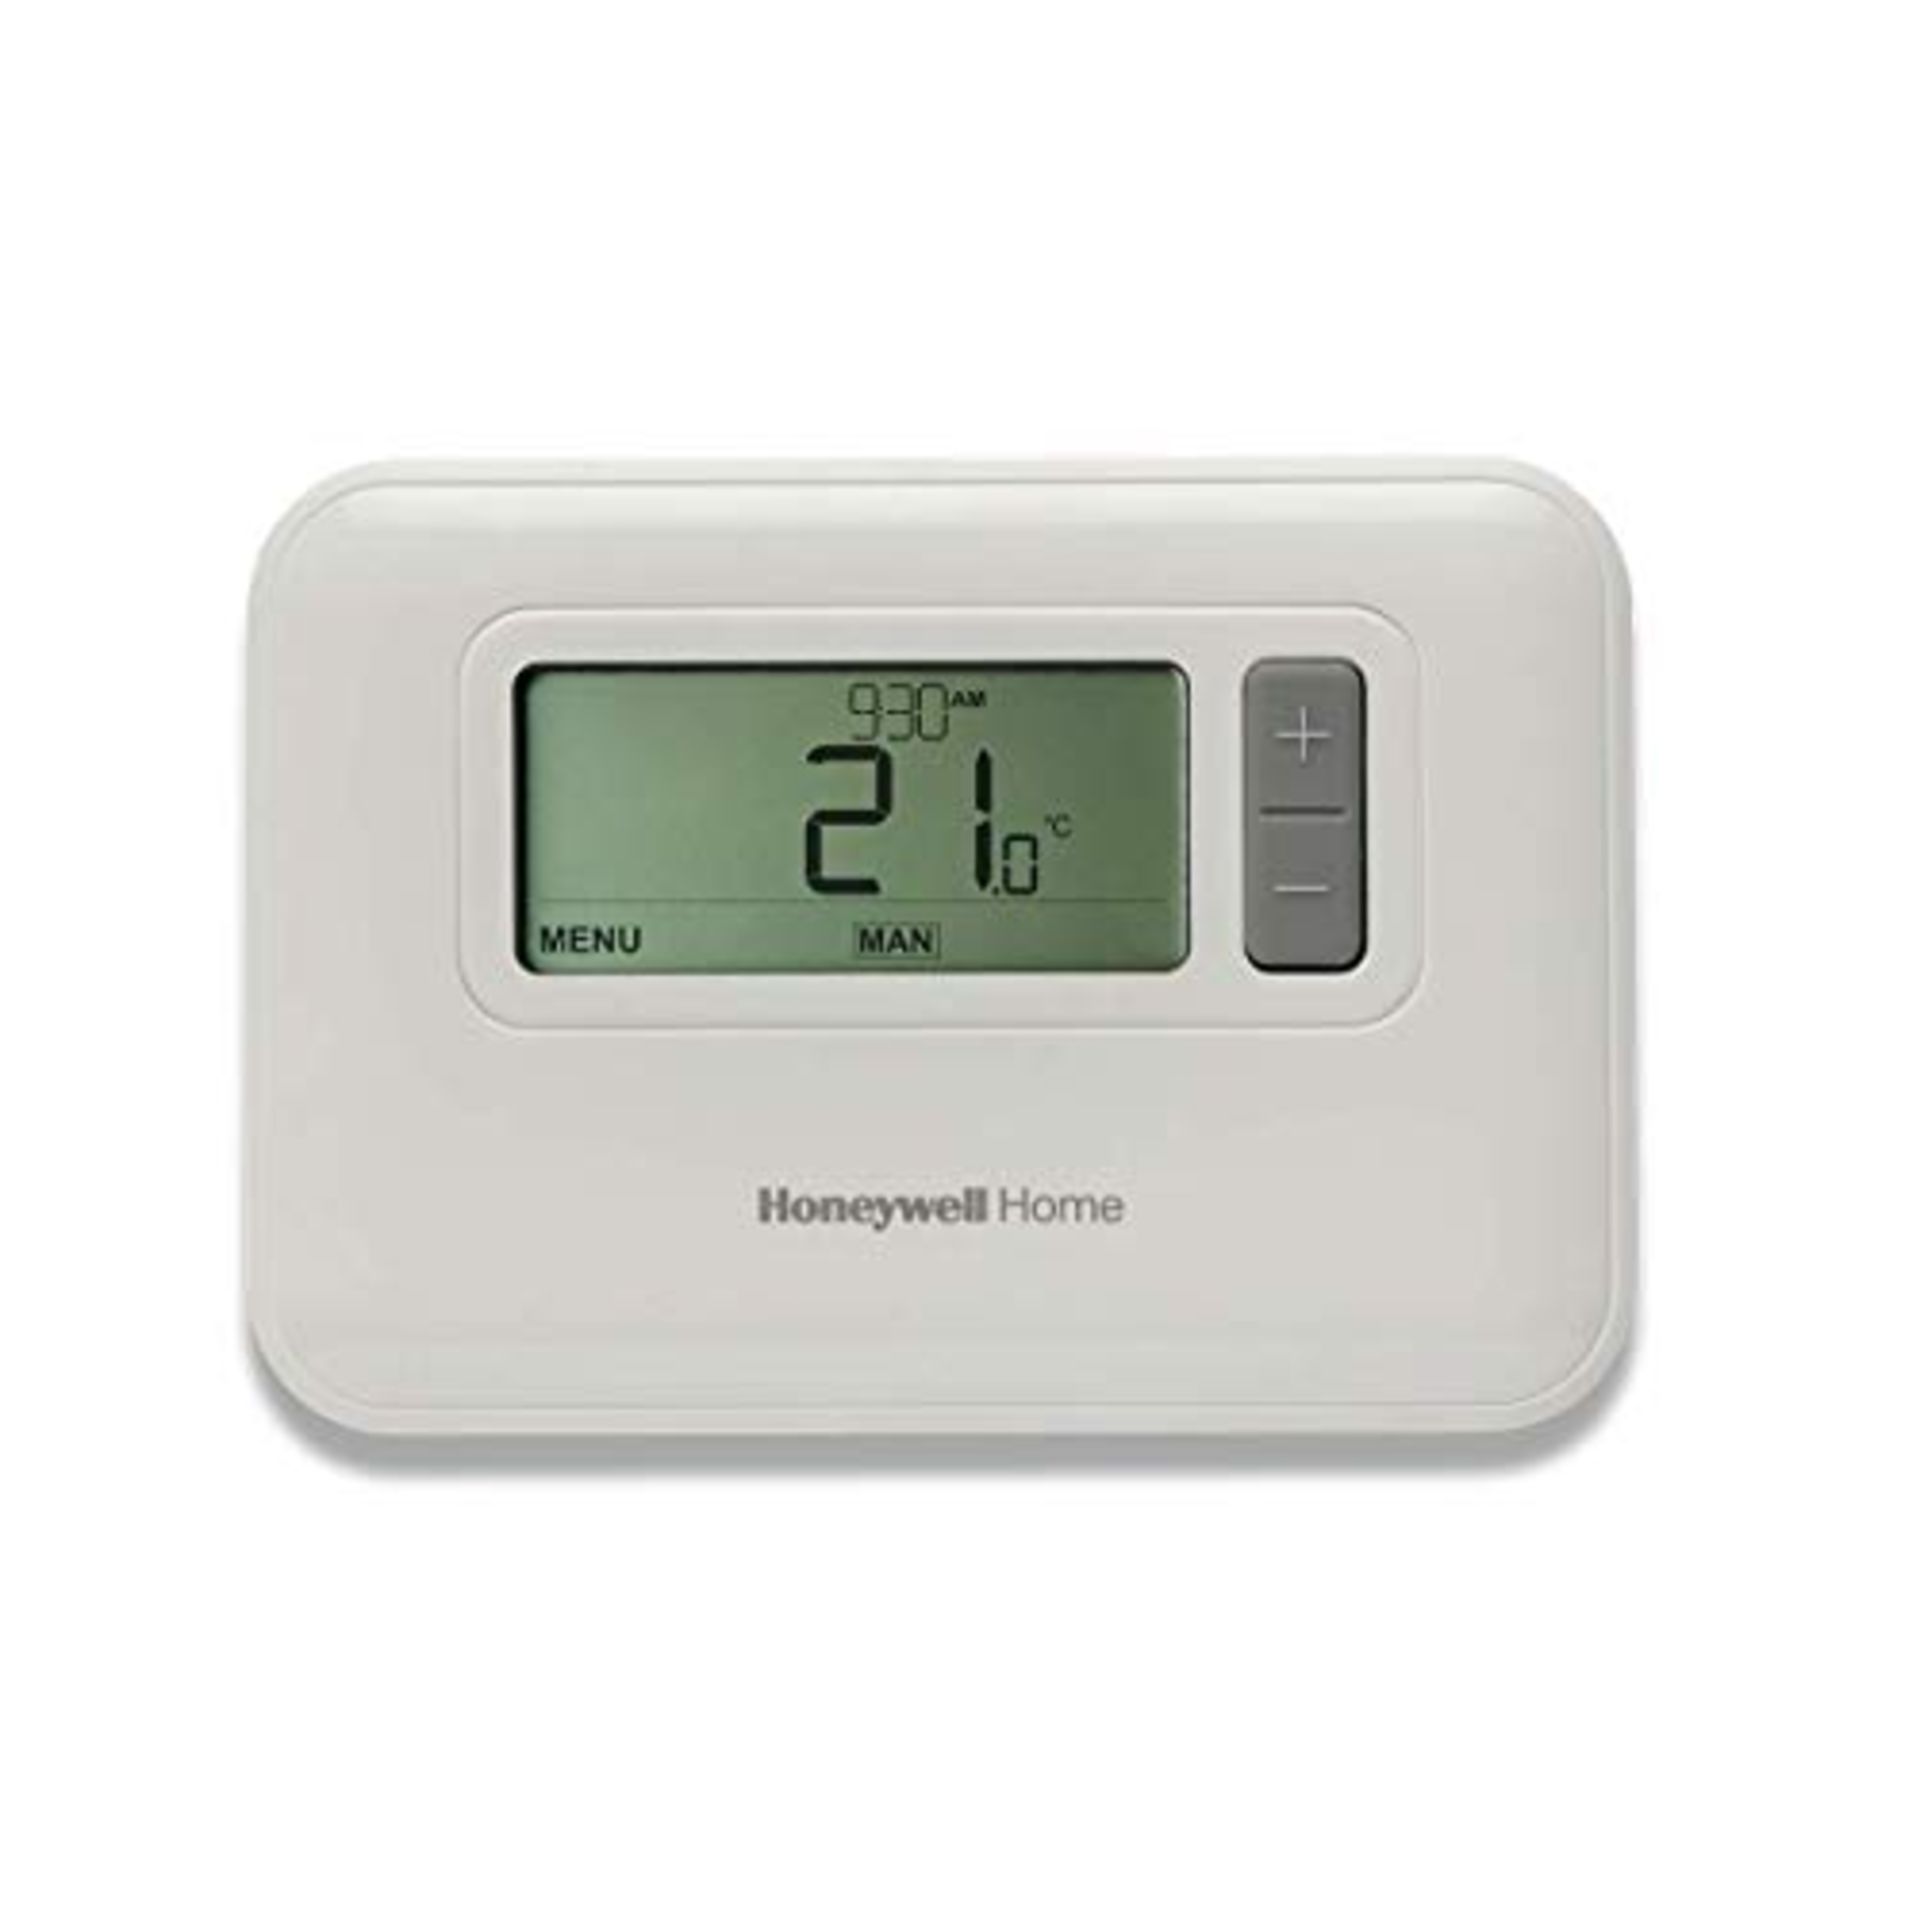 RRP £83.00 Honeywell Home T3 Wired 7-Day Programmable Thermostat, White, 136 x 97 x 26 mm